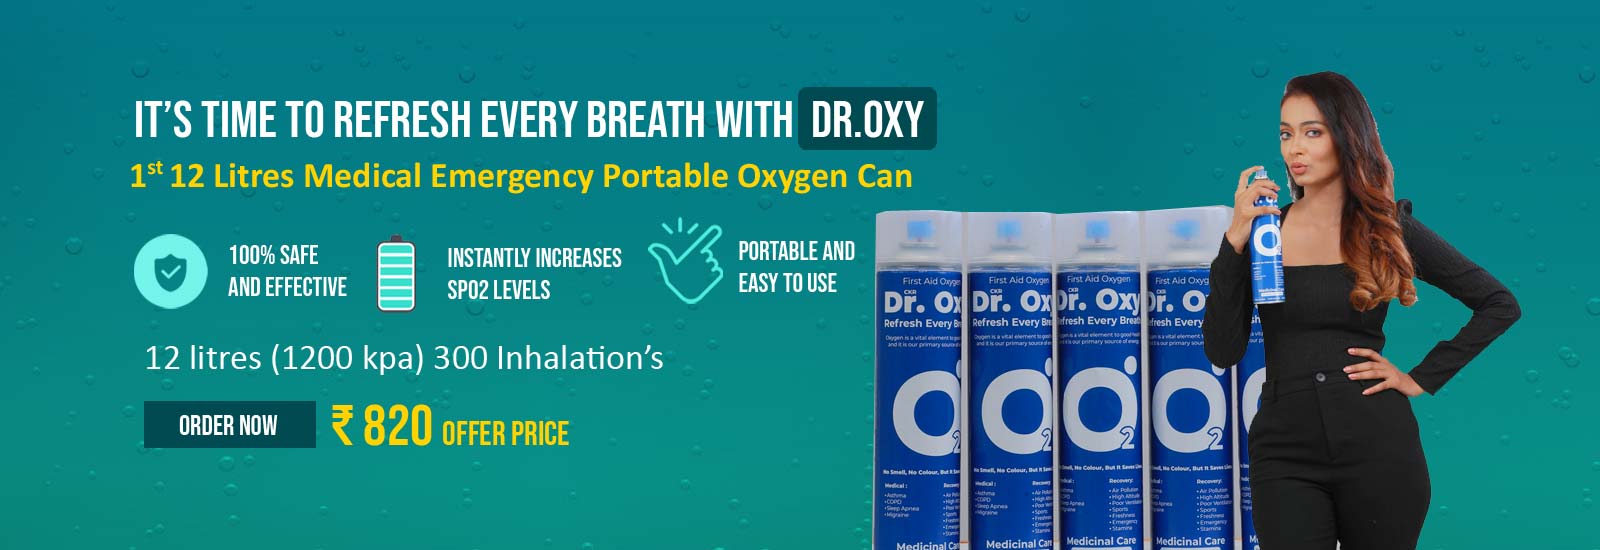 Medical Emergency Portable Oxygen Can